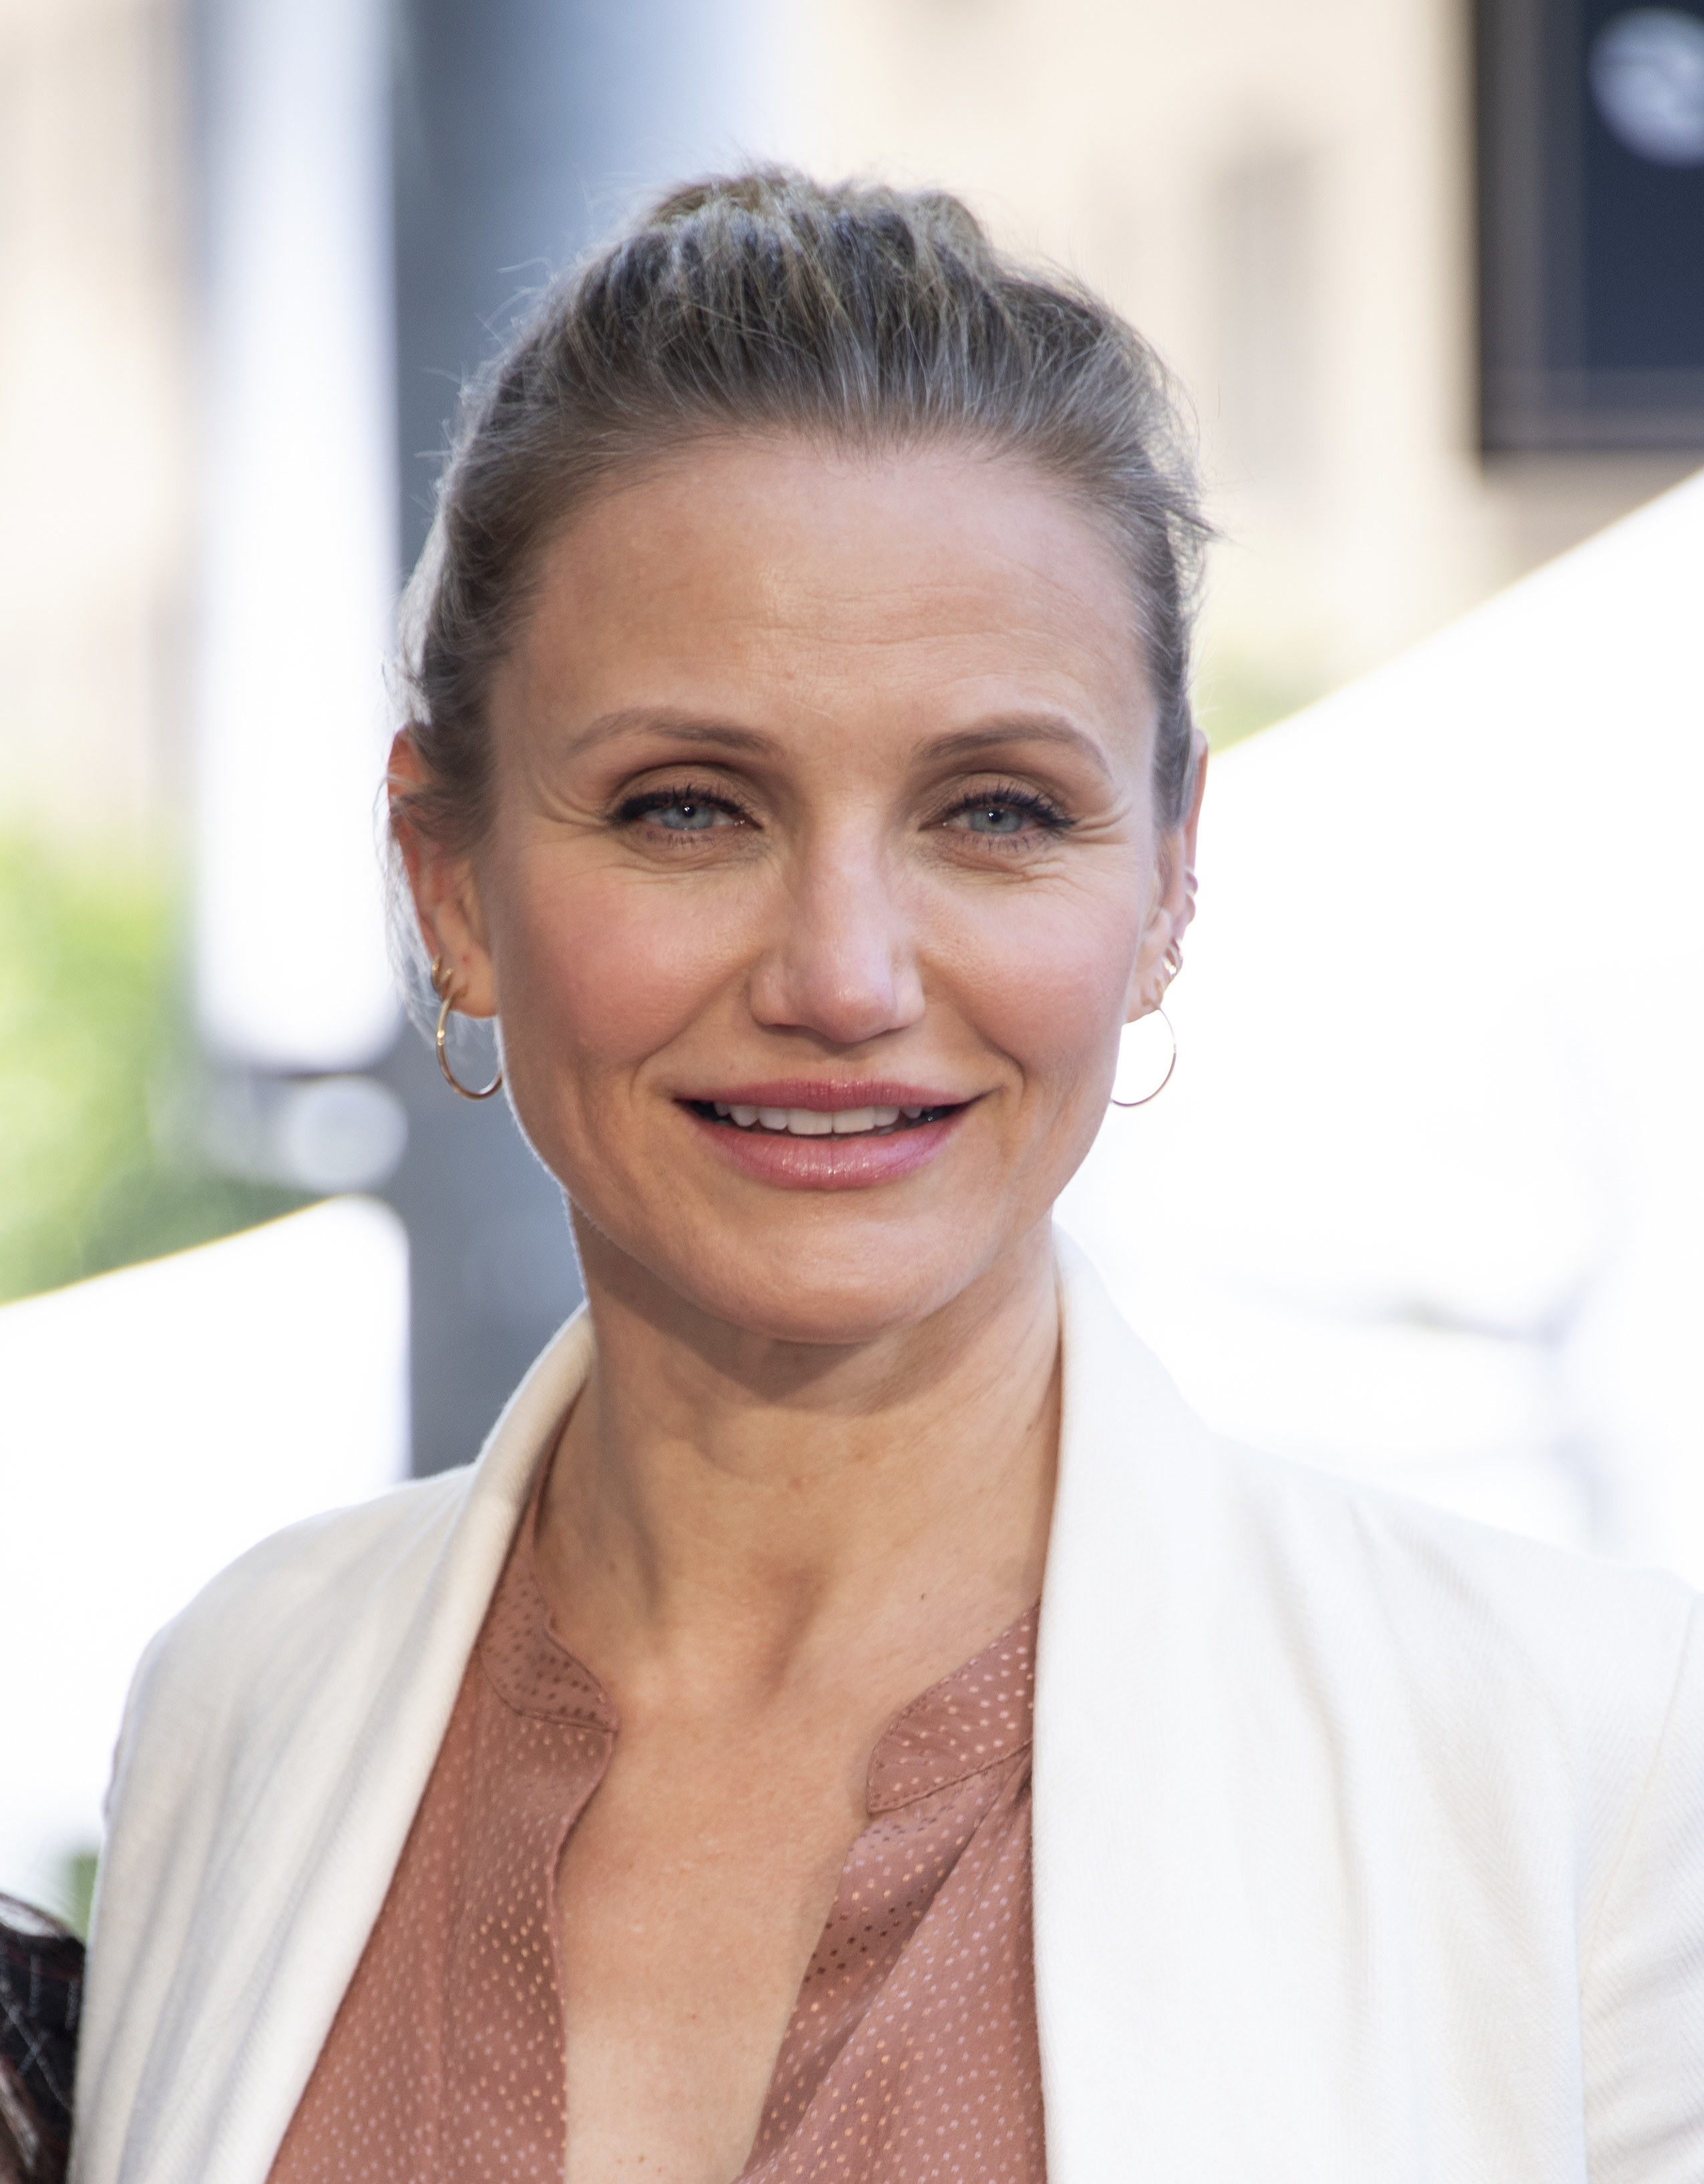 Cameron Diaz smiling in a blazer and hair loosely pulled back in a bun